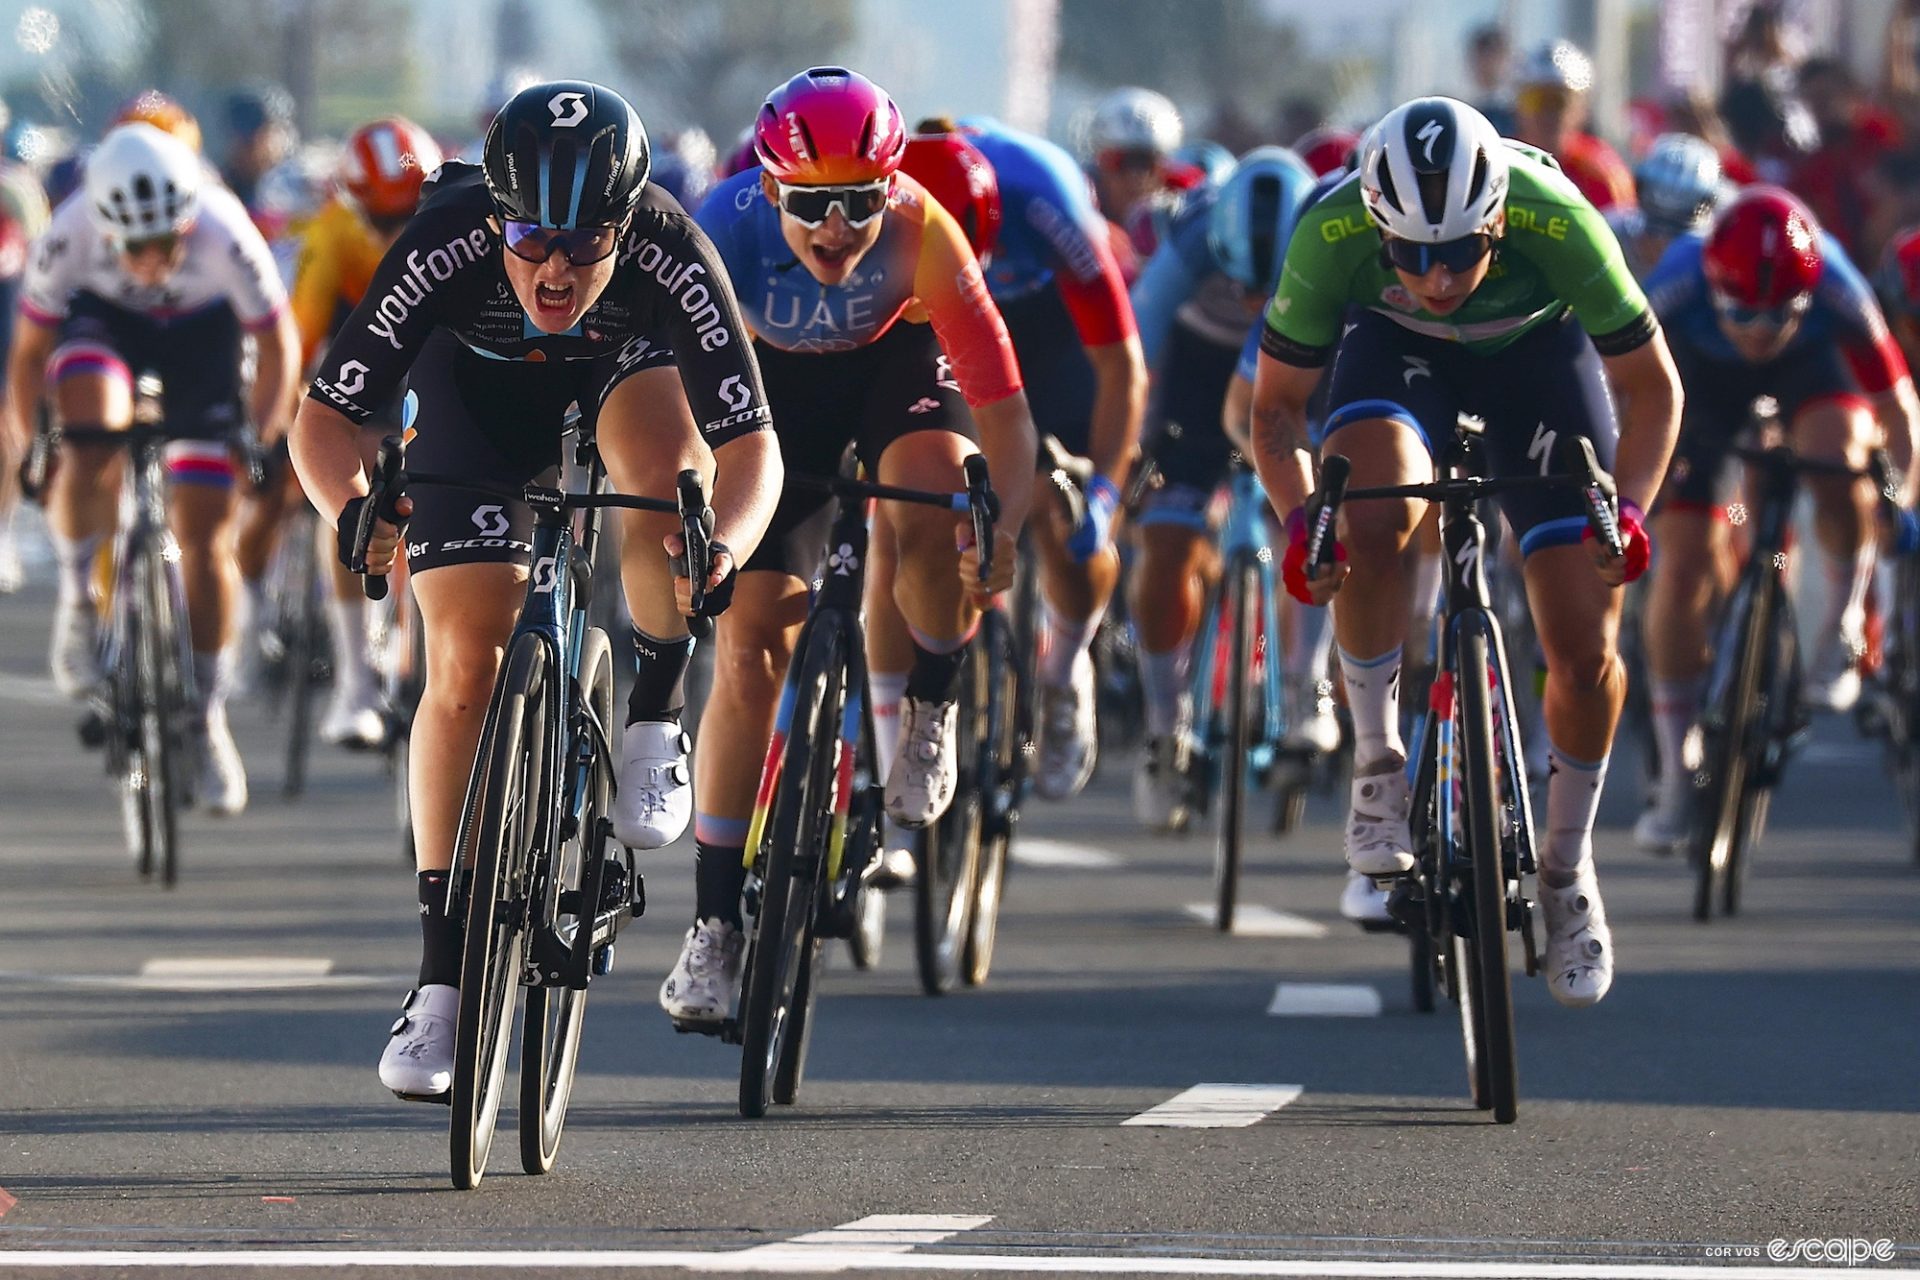 Charlotte Kool sprints it out at the UAE Tour. She's at the front, at least a bike length ahead of the chasing riders behind. Chiara Consonni is just off her wheel while Lorena Wiebes, in the green jersey for best sprinter, is to the right of Consonni trying to come around Kool.